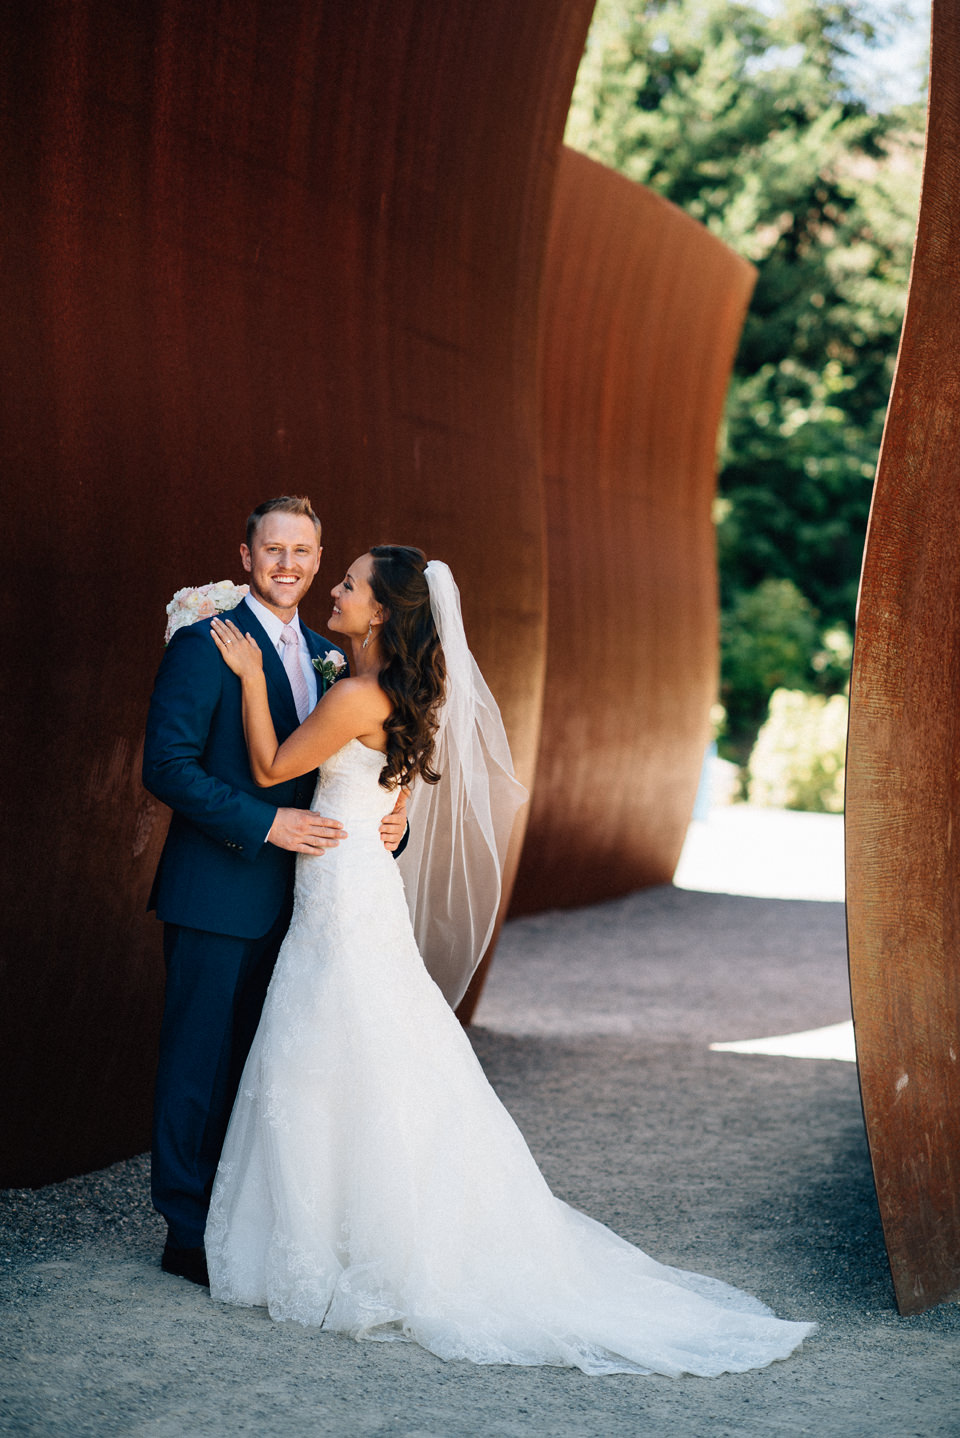 Kierstin and James pose for their wedding portraits at the Olympic Sculpture Park in Seattle